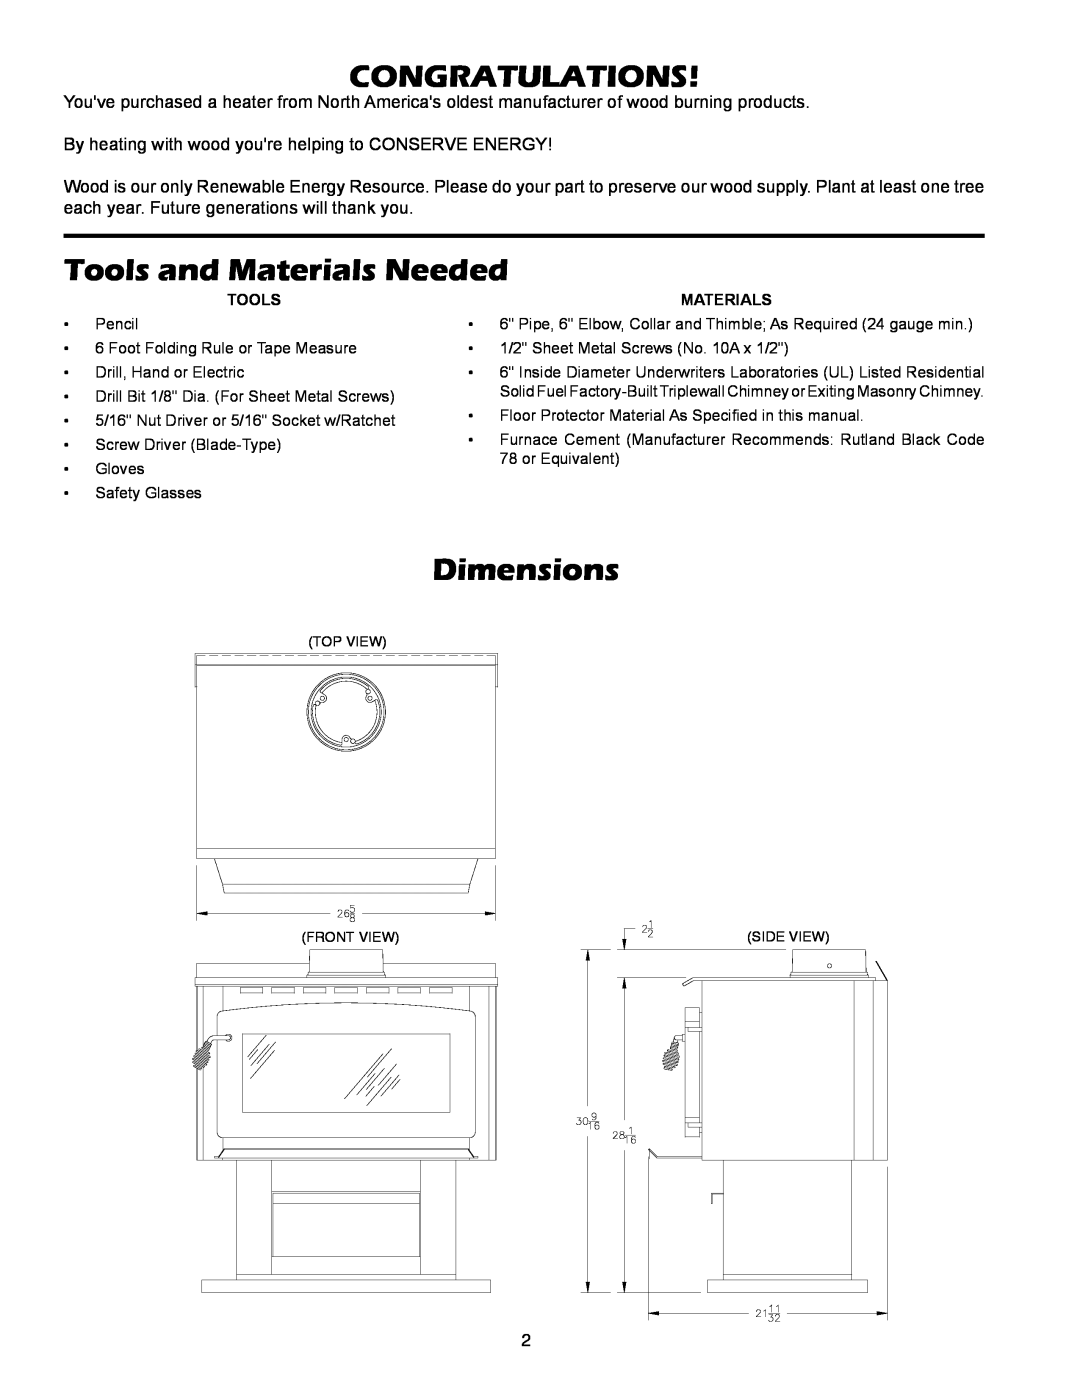 United States Stove 2007B owner manual Congratulations, Tools and Materials Needed, Dimensions 